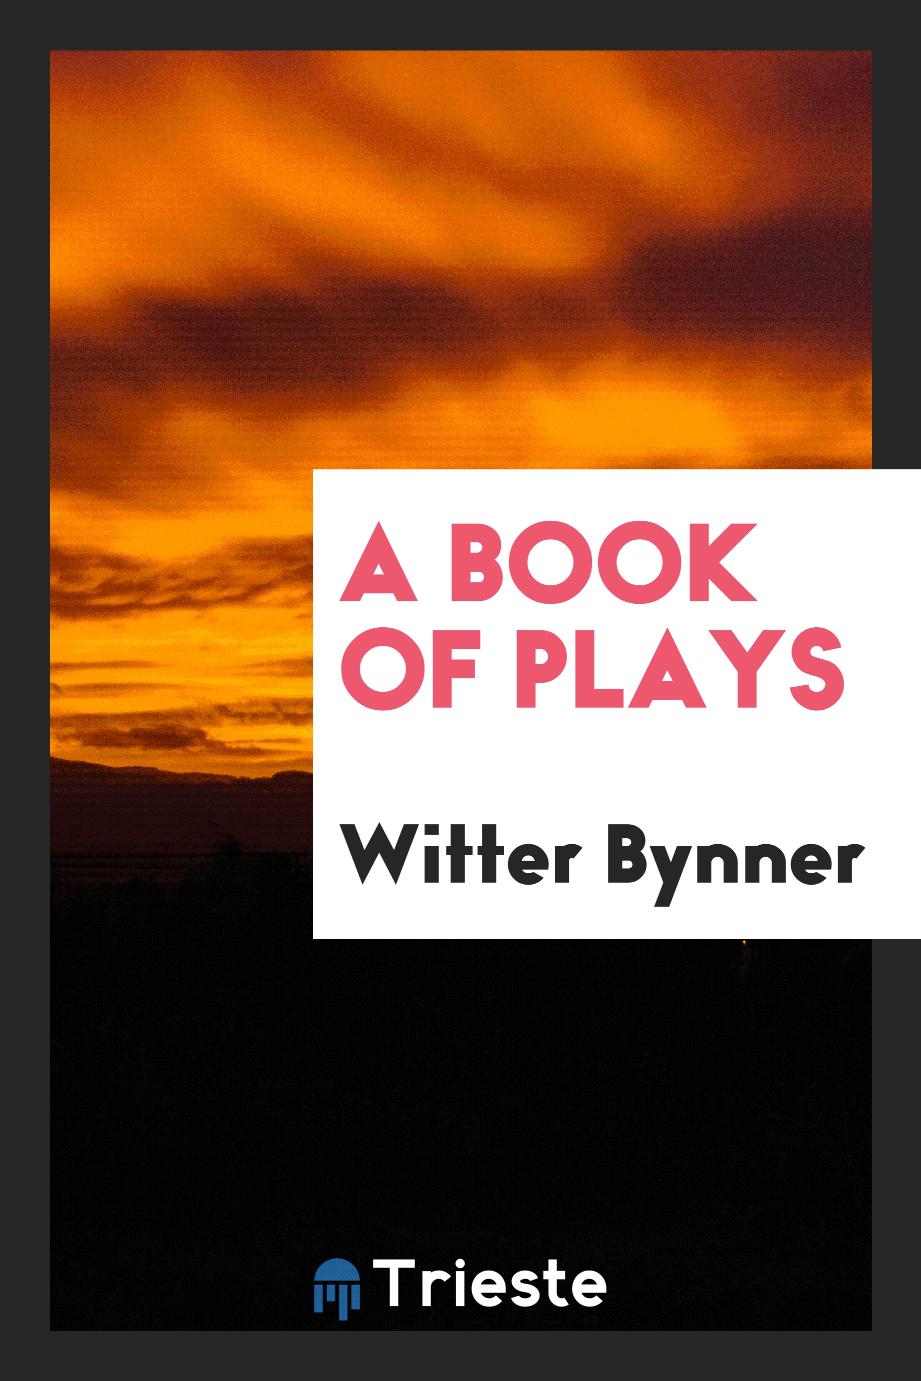 A book of plays